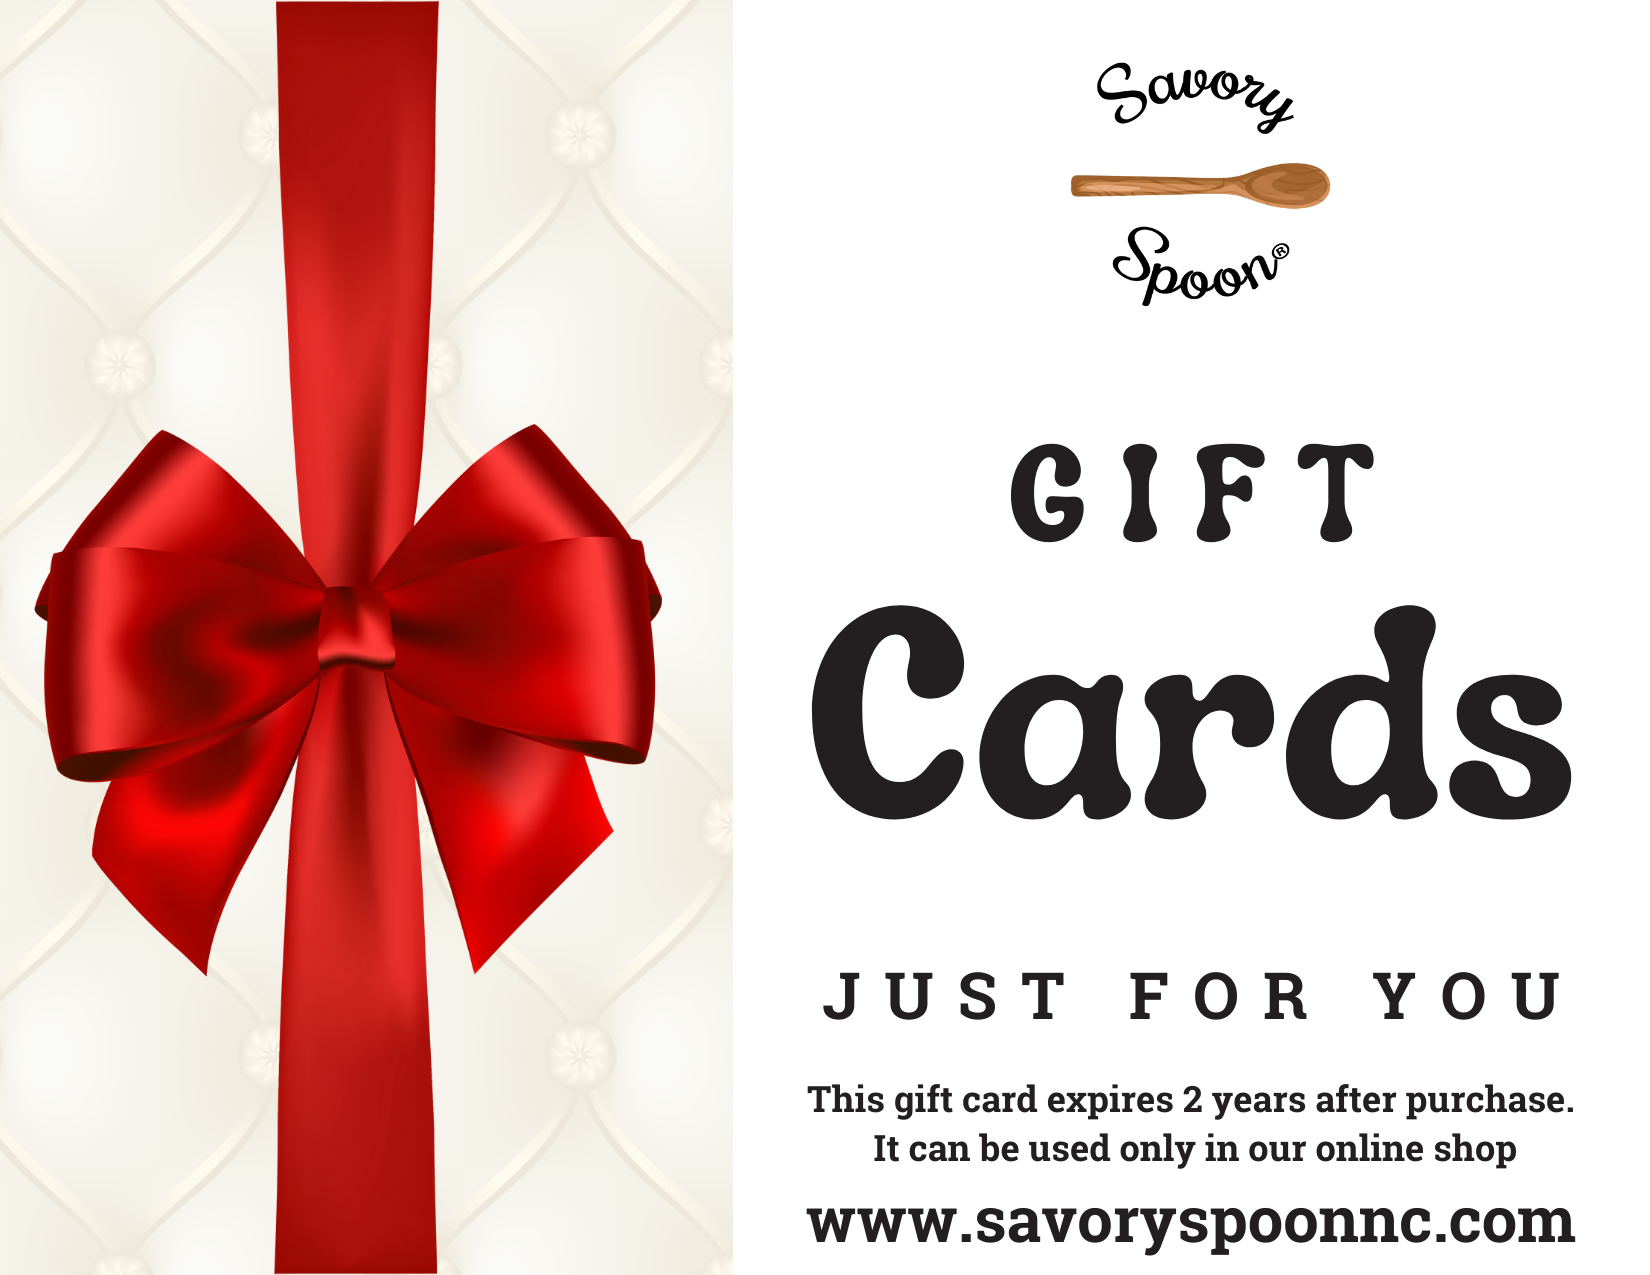 Savory Spoon Gift Cards